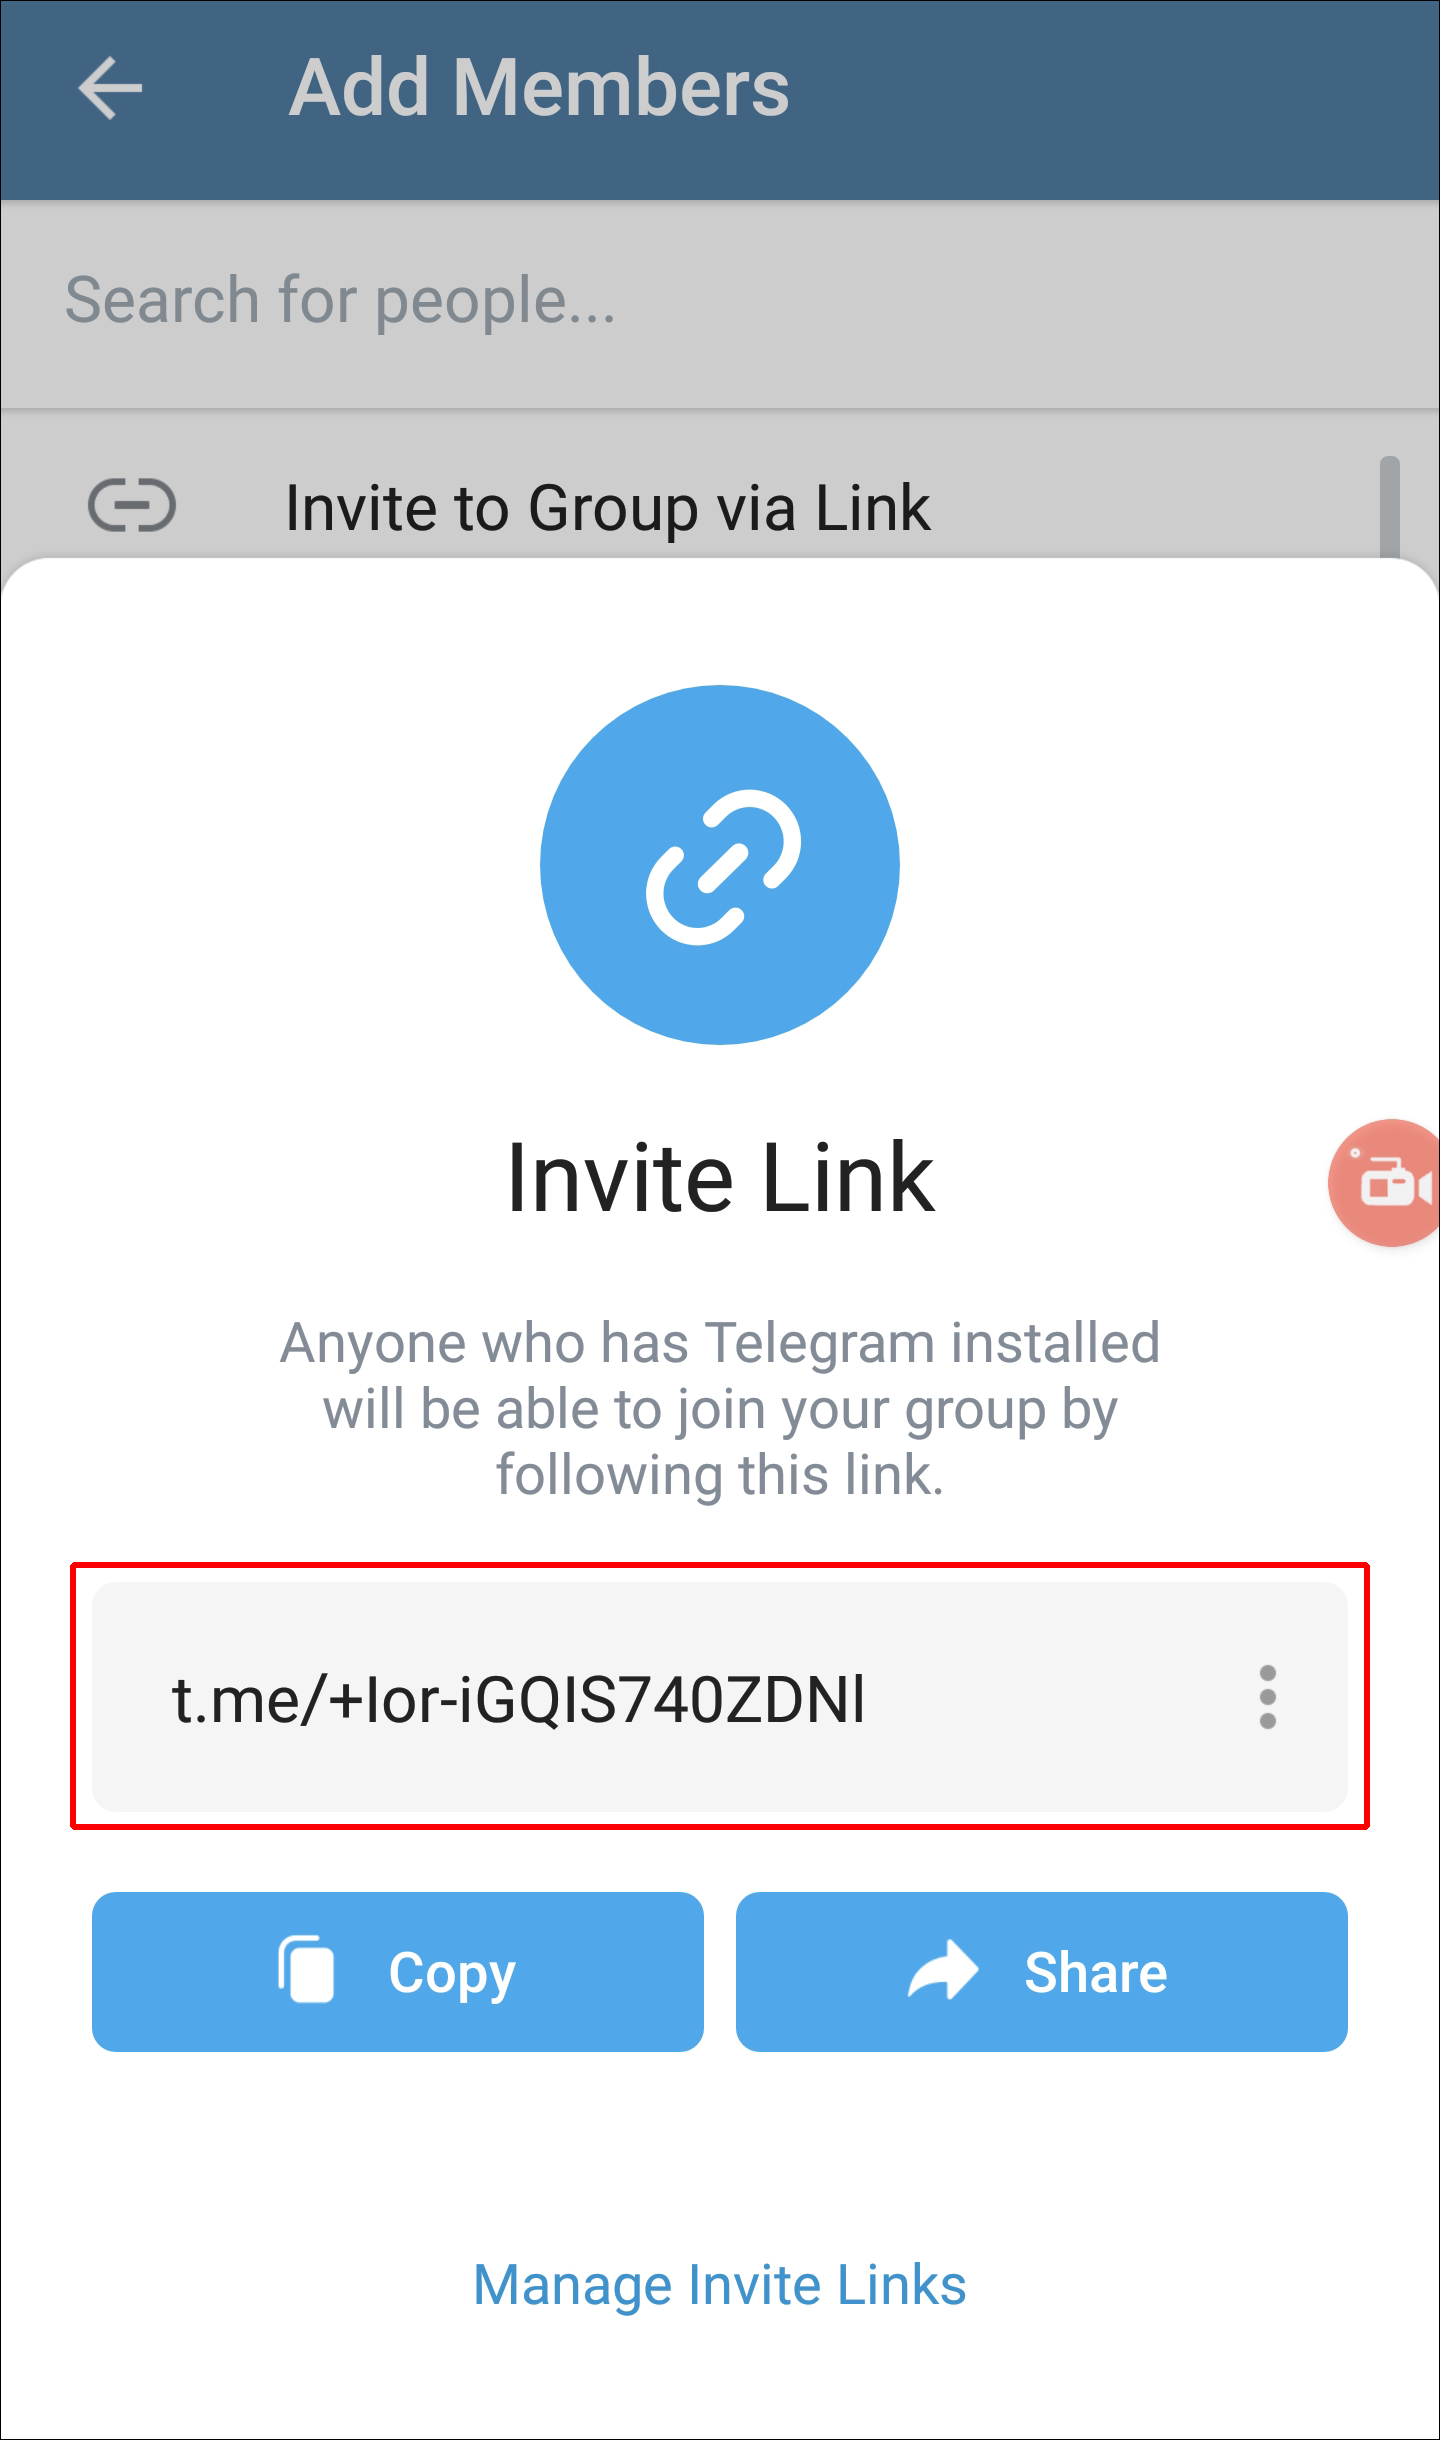 login email feature which i didn't ask for, how can i disable it : r/ Telegram